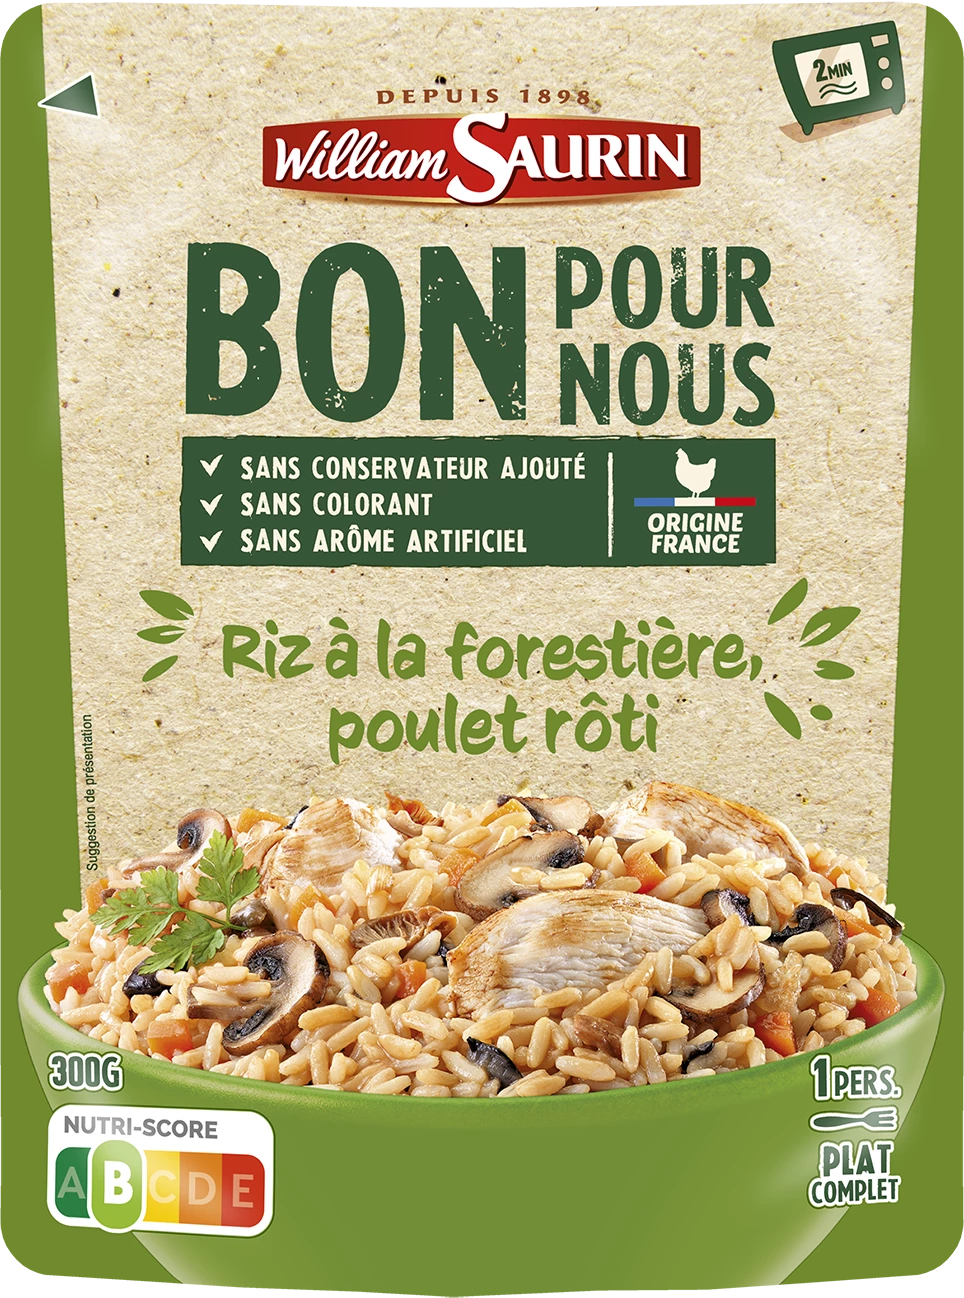 Ready Meal Forest Rice Roast Chicken, 300g - WILLIAM SAURIN